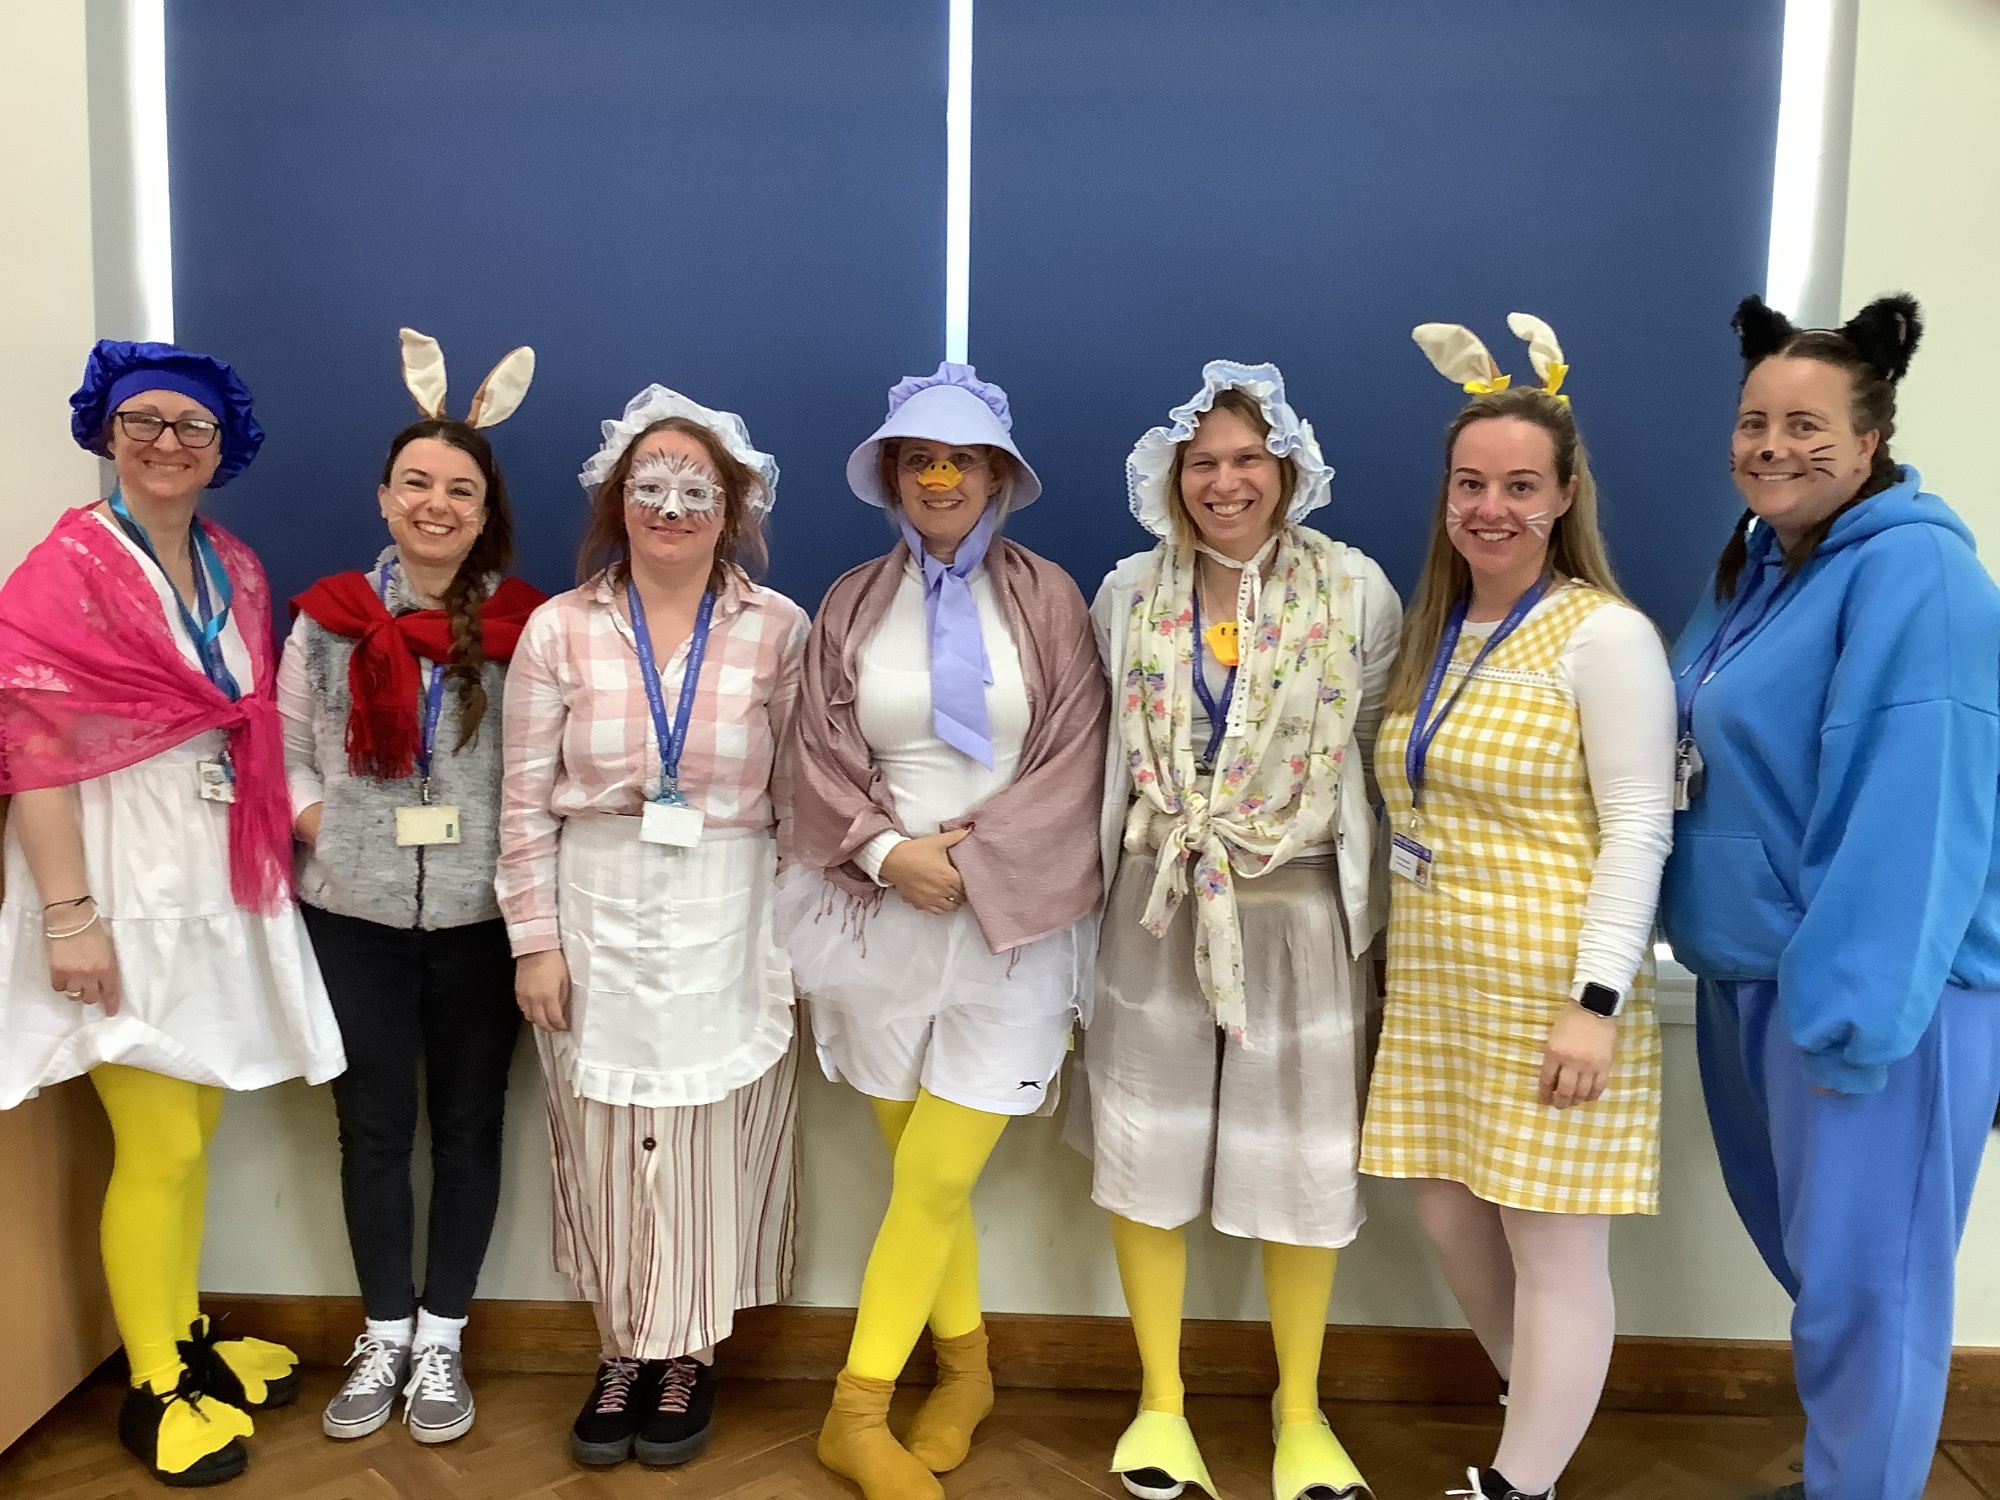 Reception staff dressing up for World Book Day 24